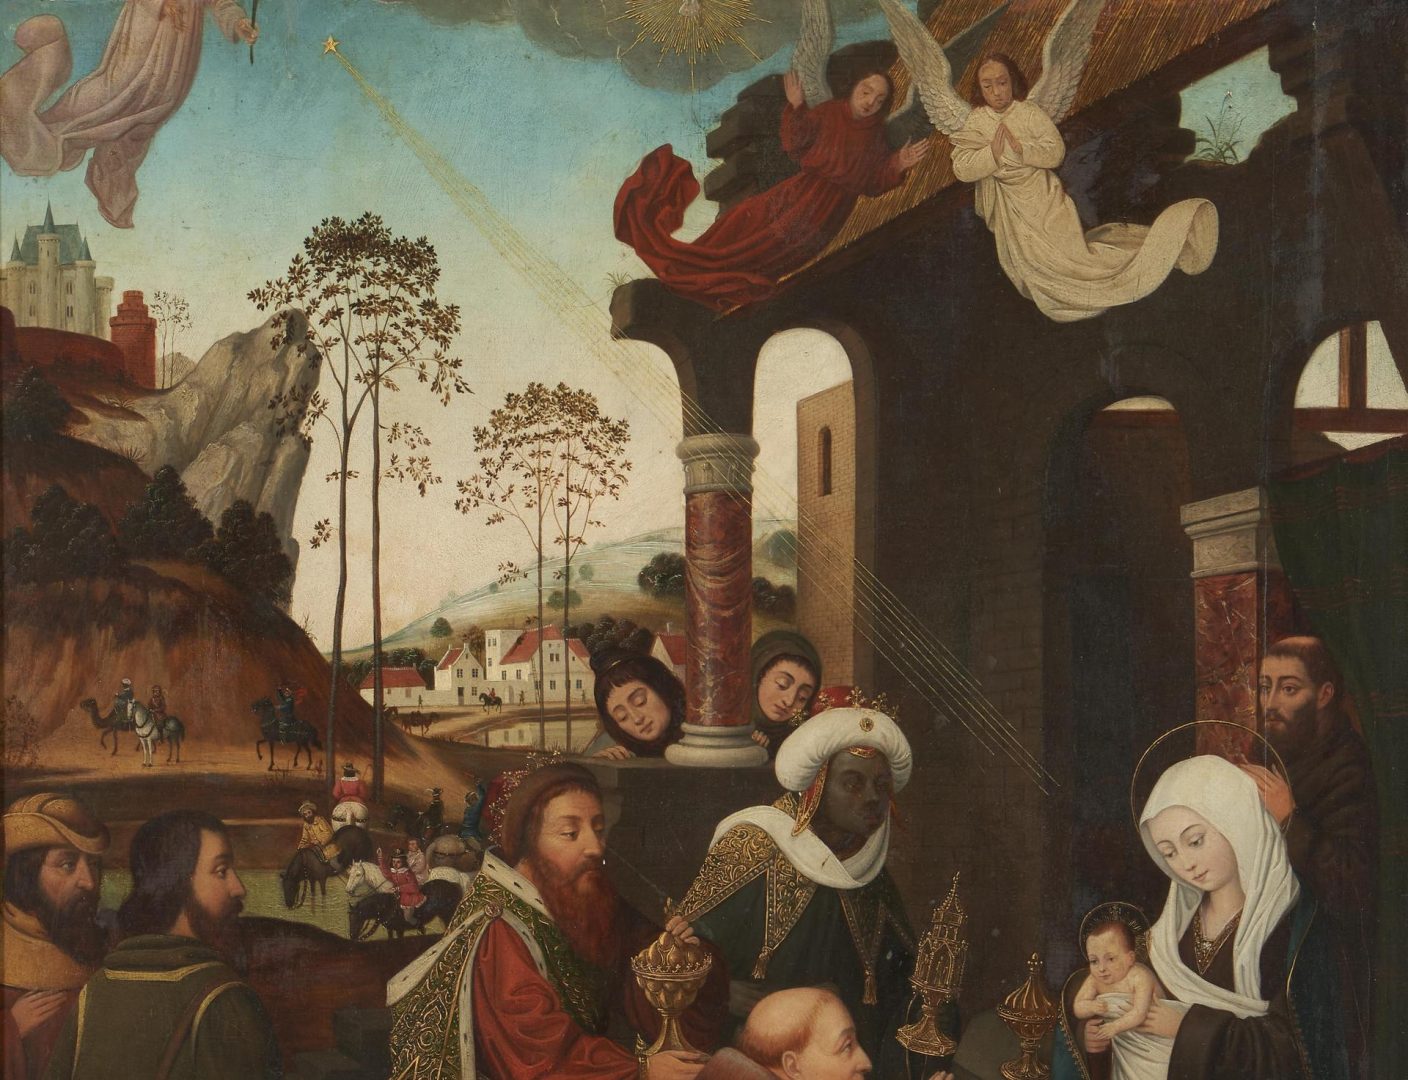 Lot 127: Follower of Quentin Matsys, N. Renaissance Style Triptych Painting of Christ’s Early Life